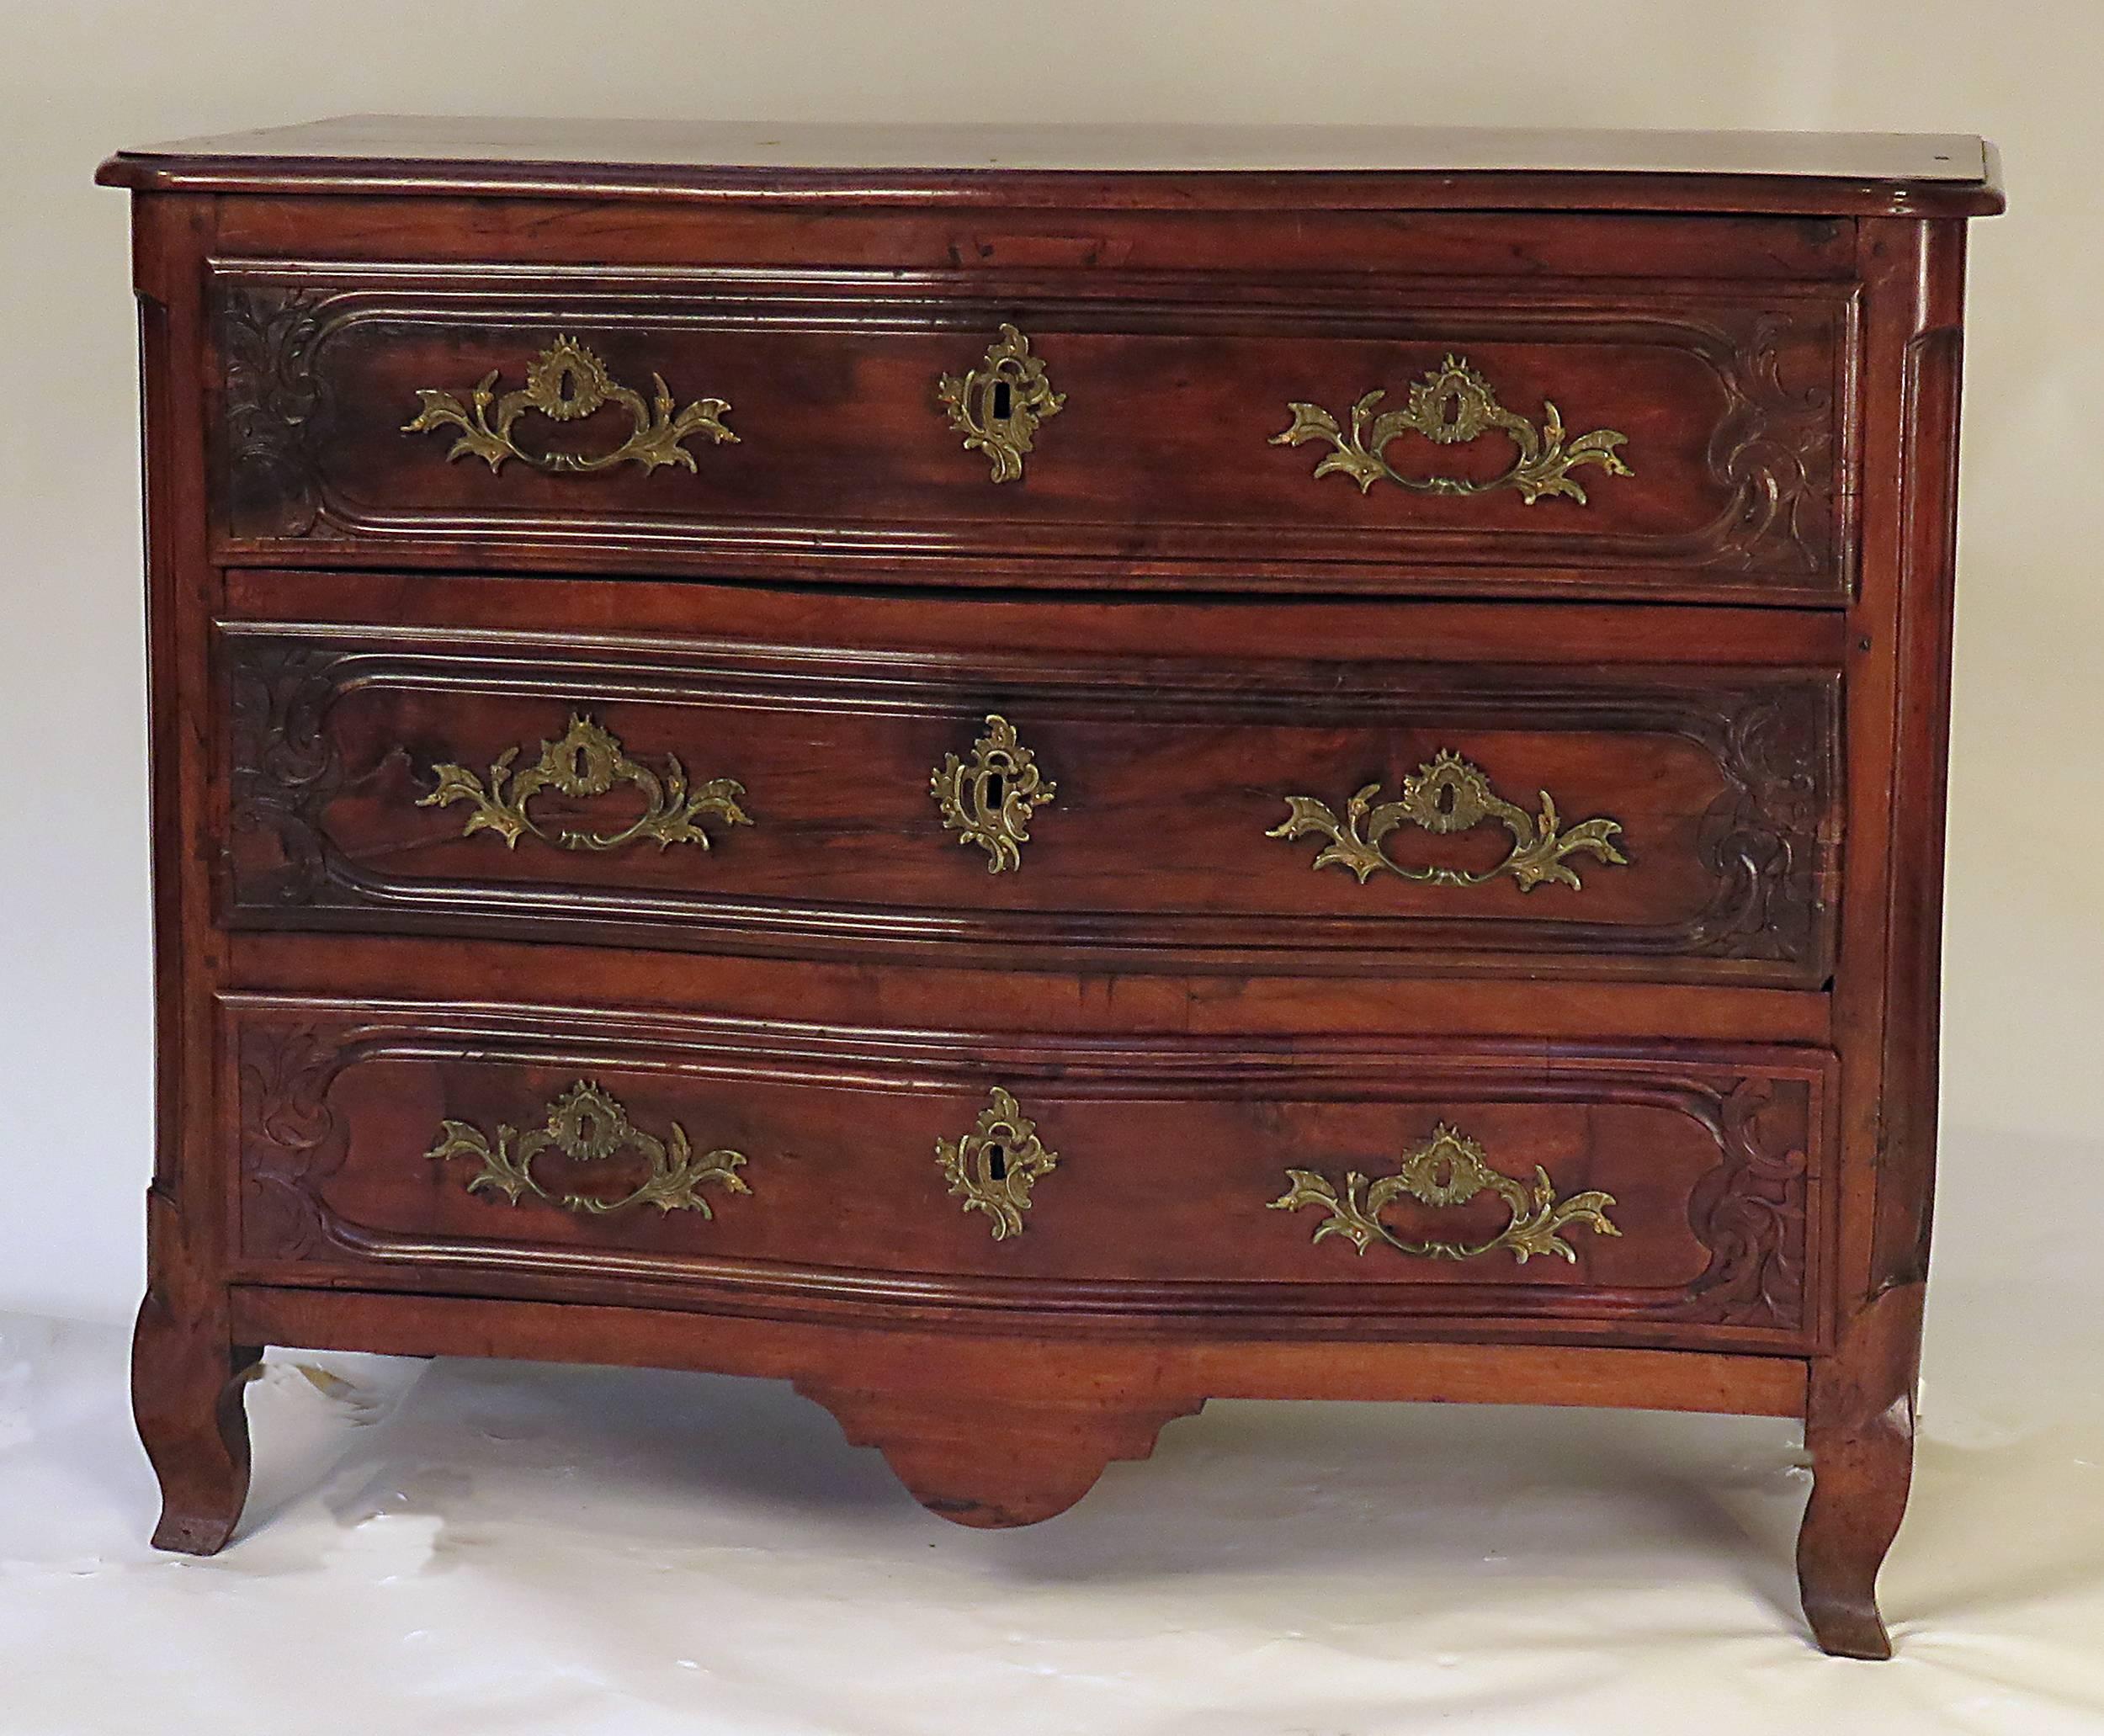 A handsome and well carved Louis XV walnut chest/commode made in Italy during the last quarter of the 18th century. Nice rich color with a good older surface. Drawer liners with reinforced runners so that they open easily. A substantial piece that